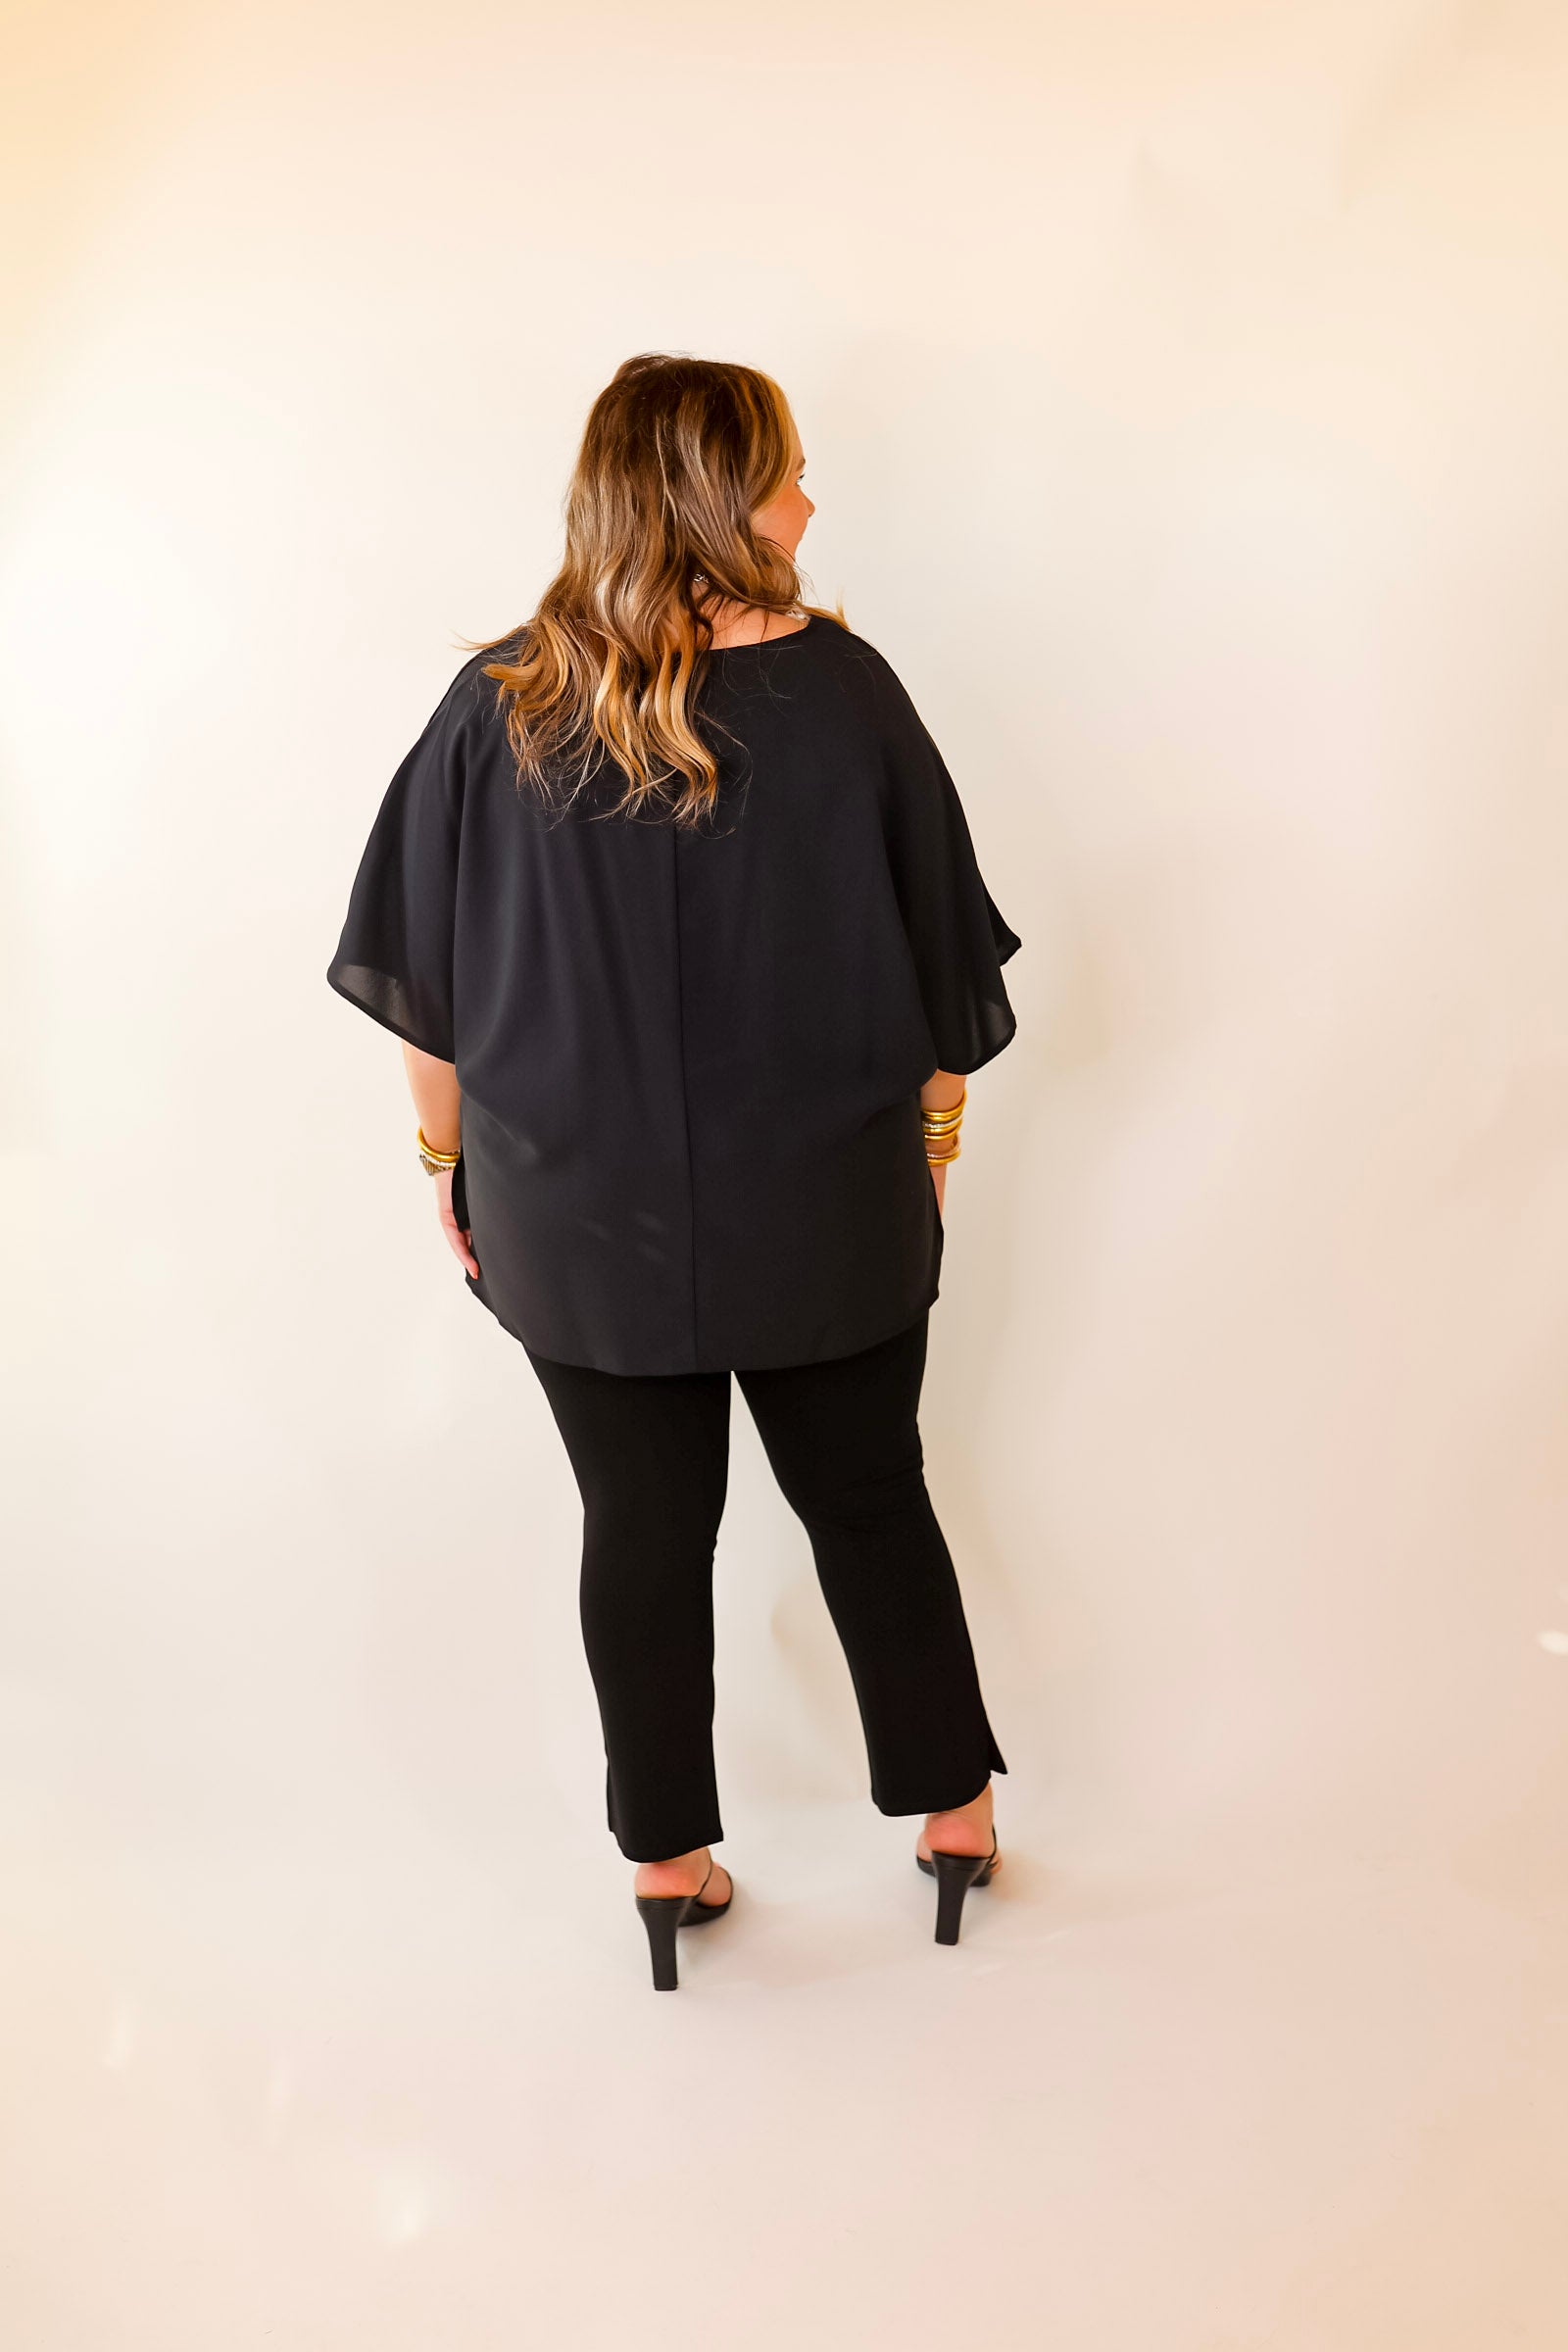 Majestic Moment V Neck Poncho Top in Black - Giddy Up Glamour Boutique